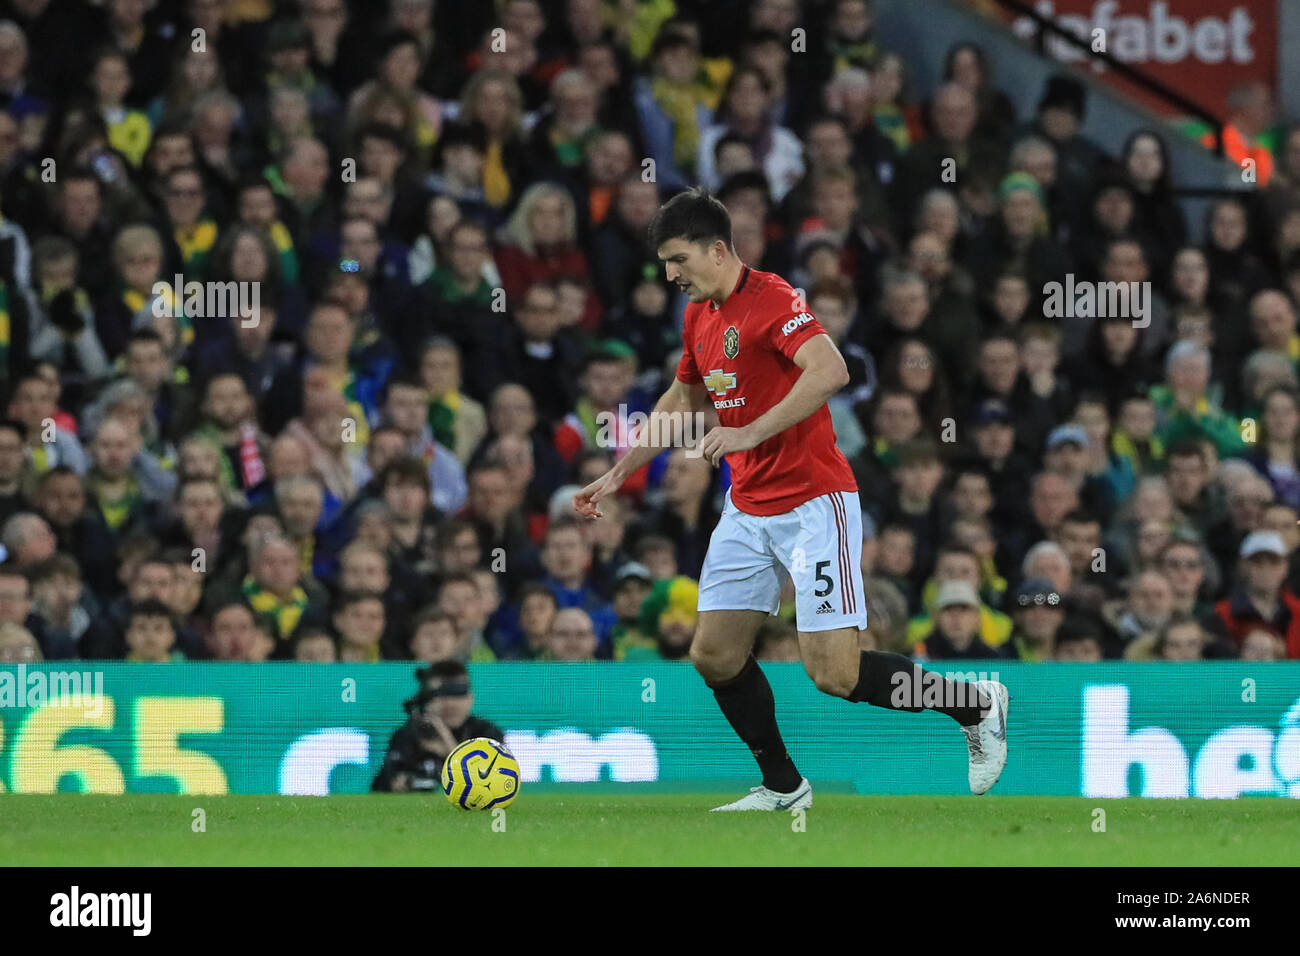 27th October 2019, Carrow Road, Norwich, England; Premier League, Norwich City v Manchester United : Harry Maguire (5) of Manchester United in action during the game  Credit: Mark Cosgrove/News Images Stock Photo